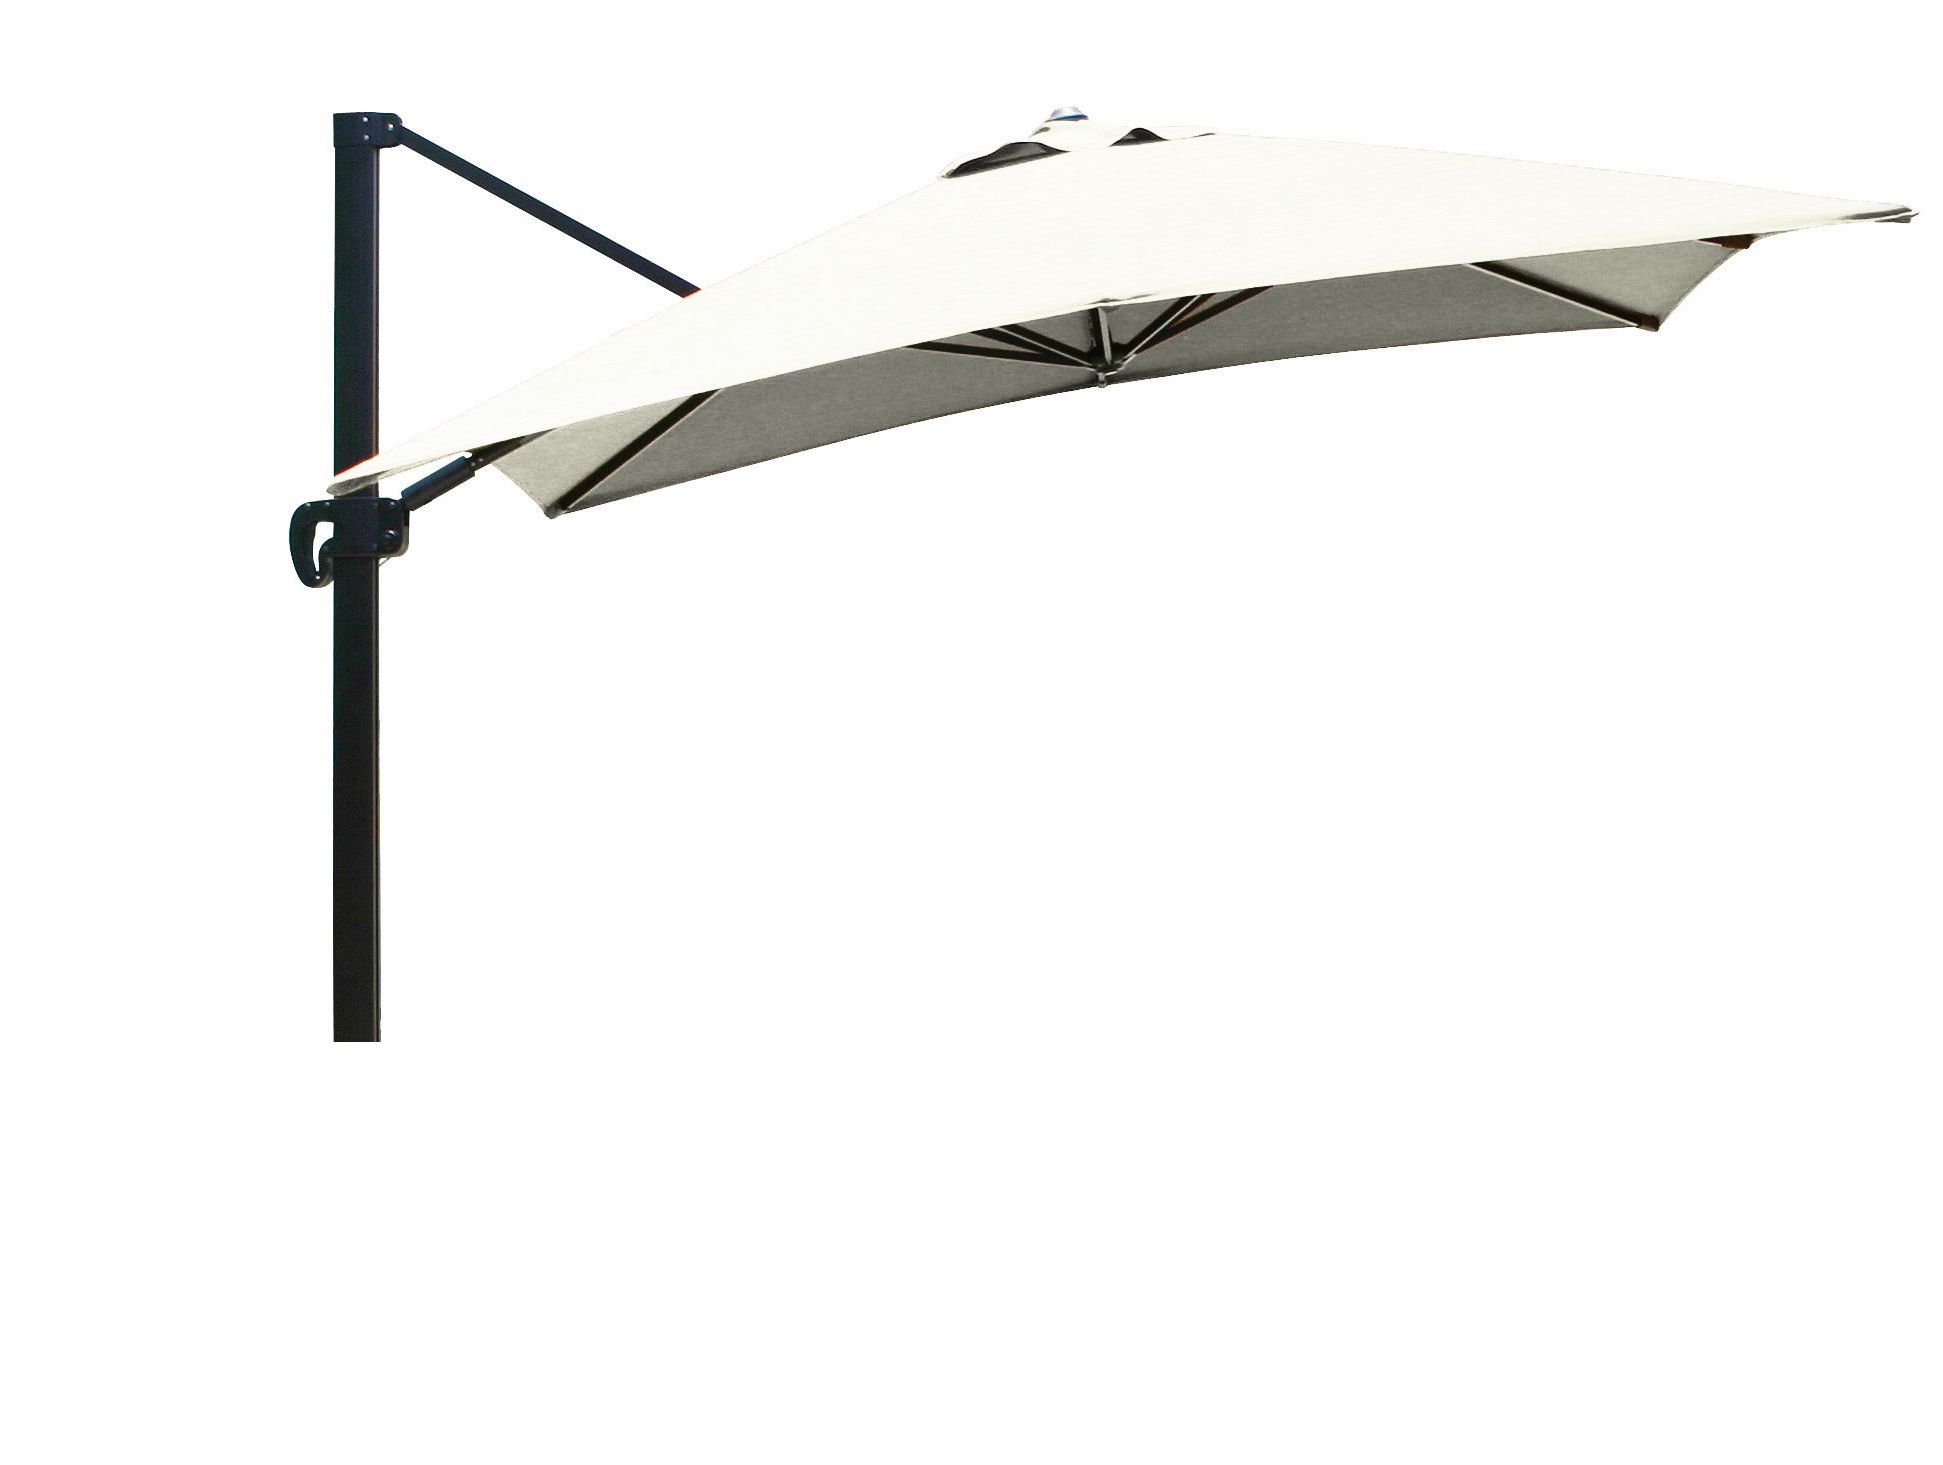 Carlisle Cantilever Sunbrella Umbrellas Intended For Most Up To Date Carlisle 10' Square Cantilever Sunbrella Umbrella (View 3 of 20)